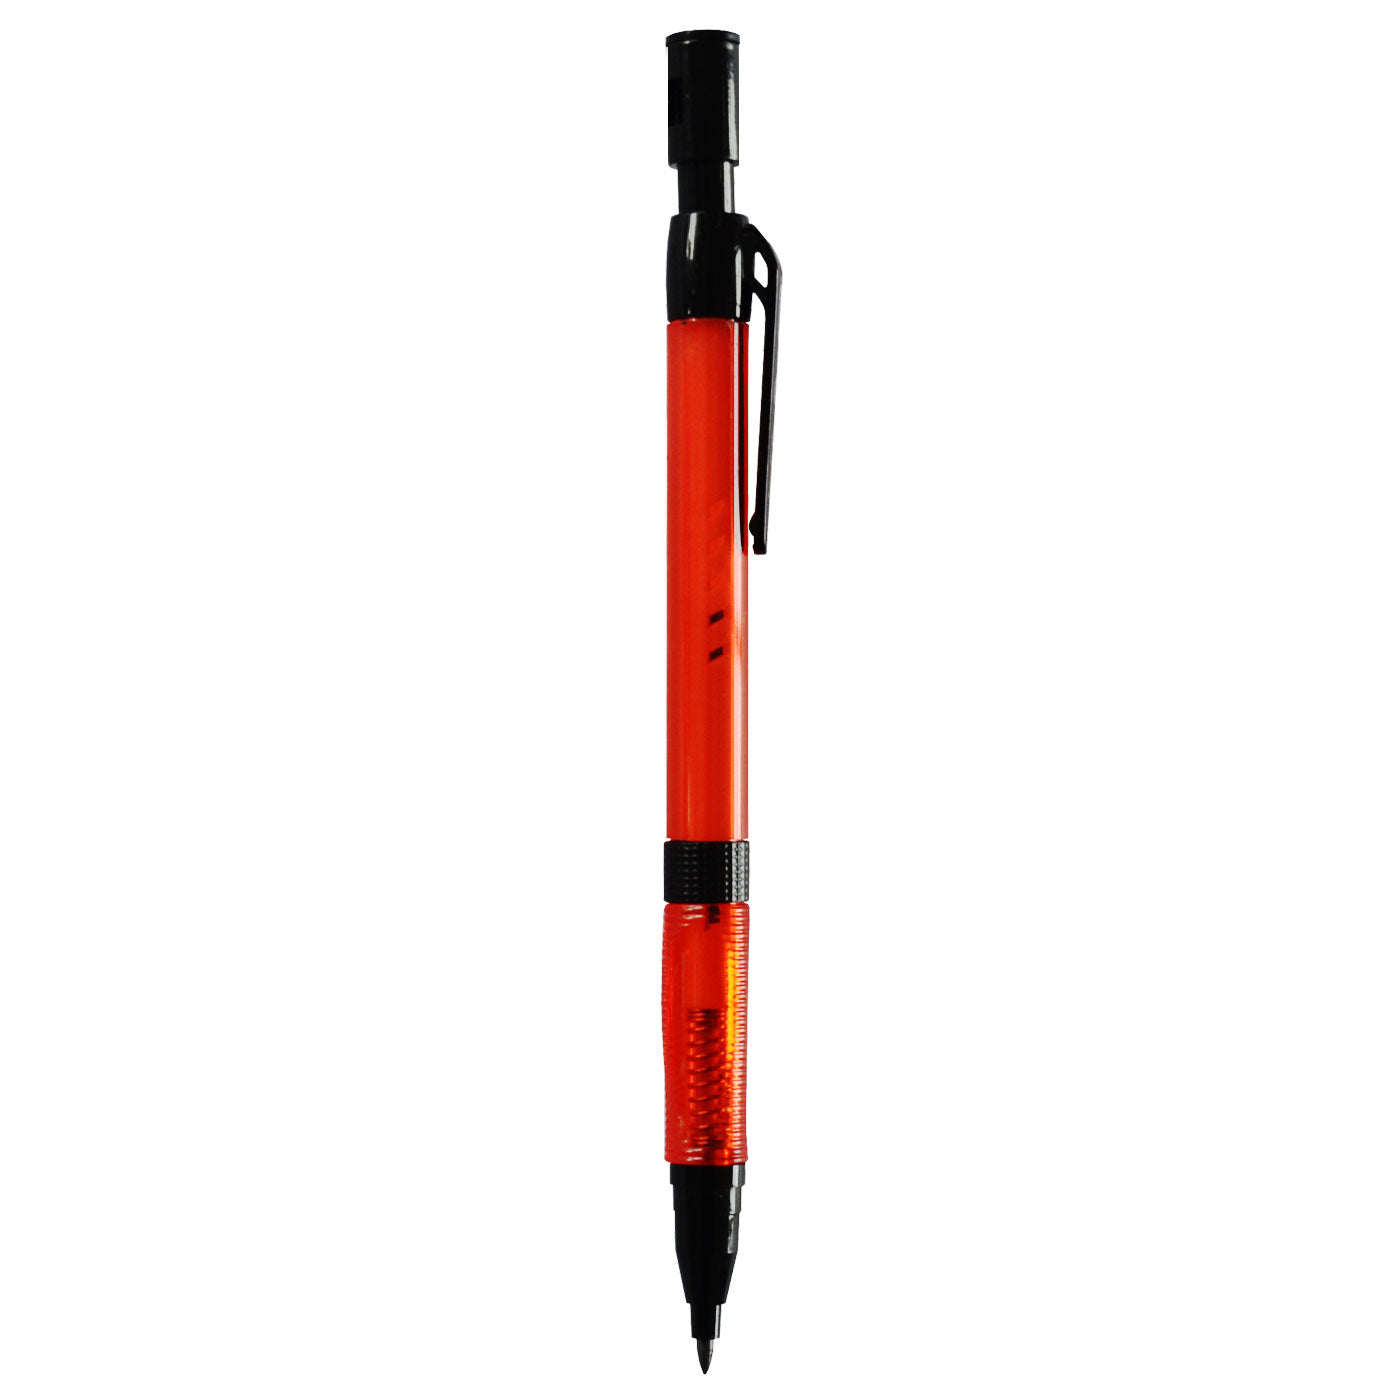 Tyco Triangular Grip HB Mechanical Pencil TY-520 With Sharpener 2.00mm Red